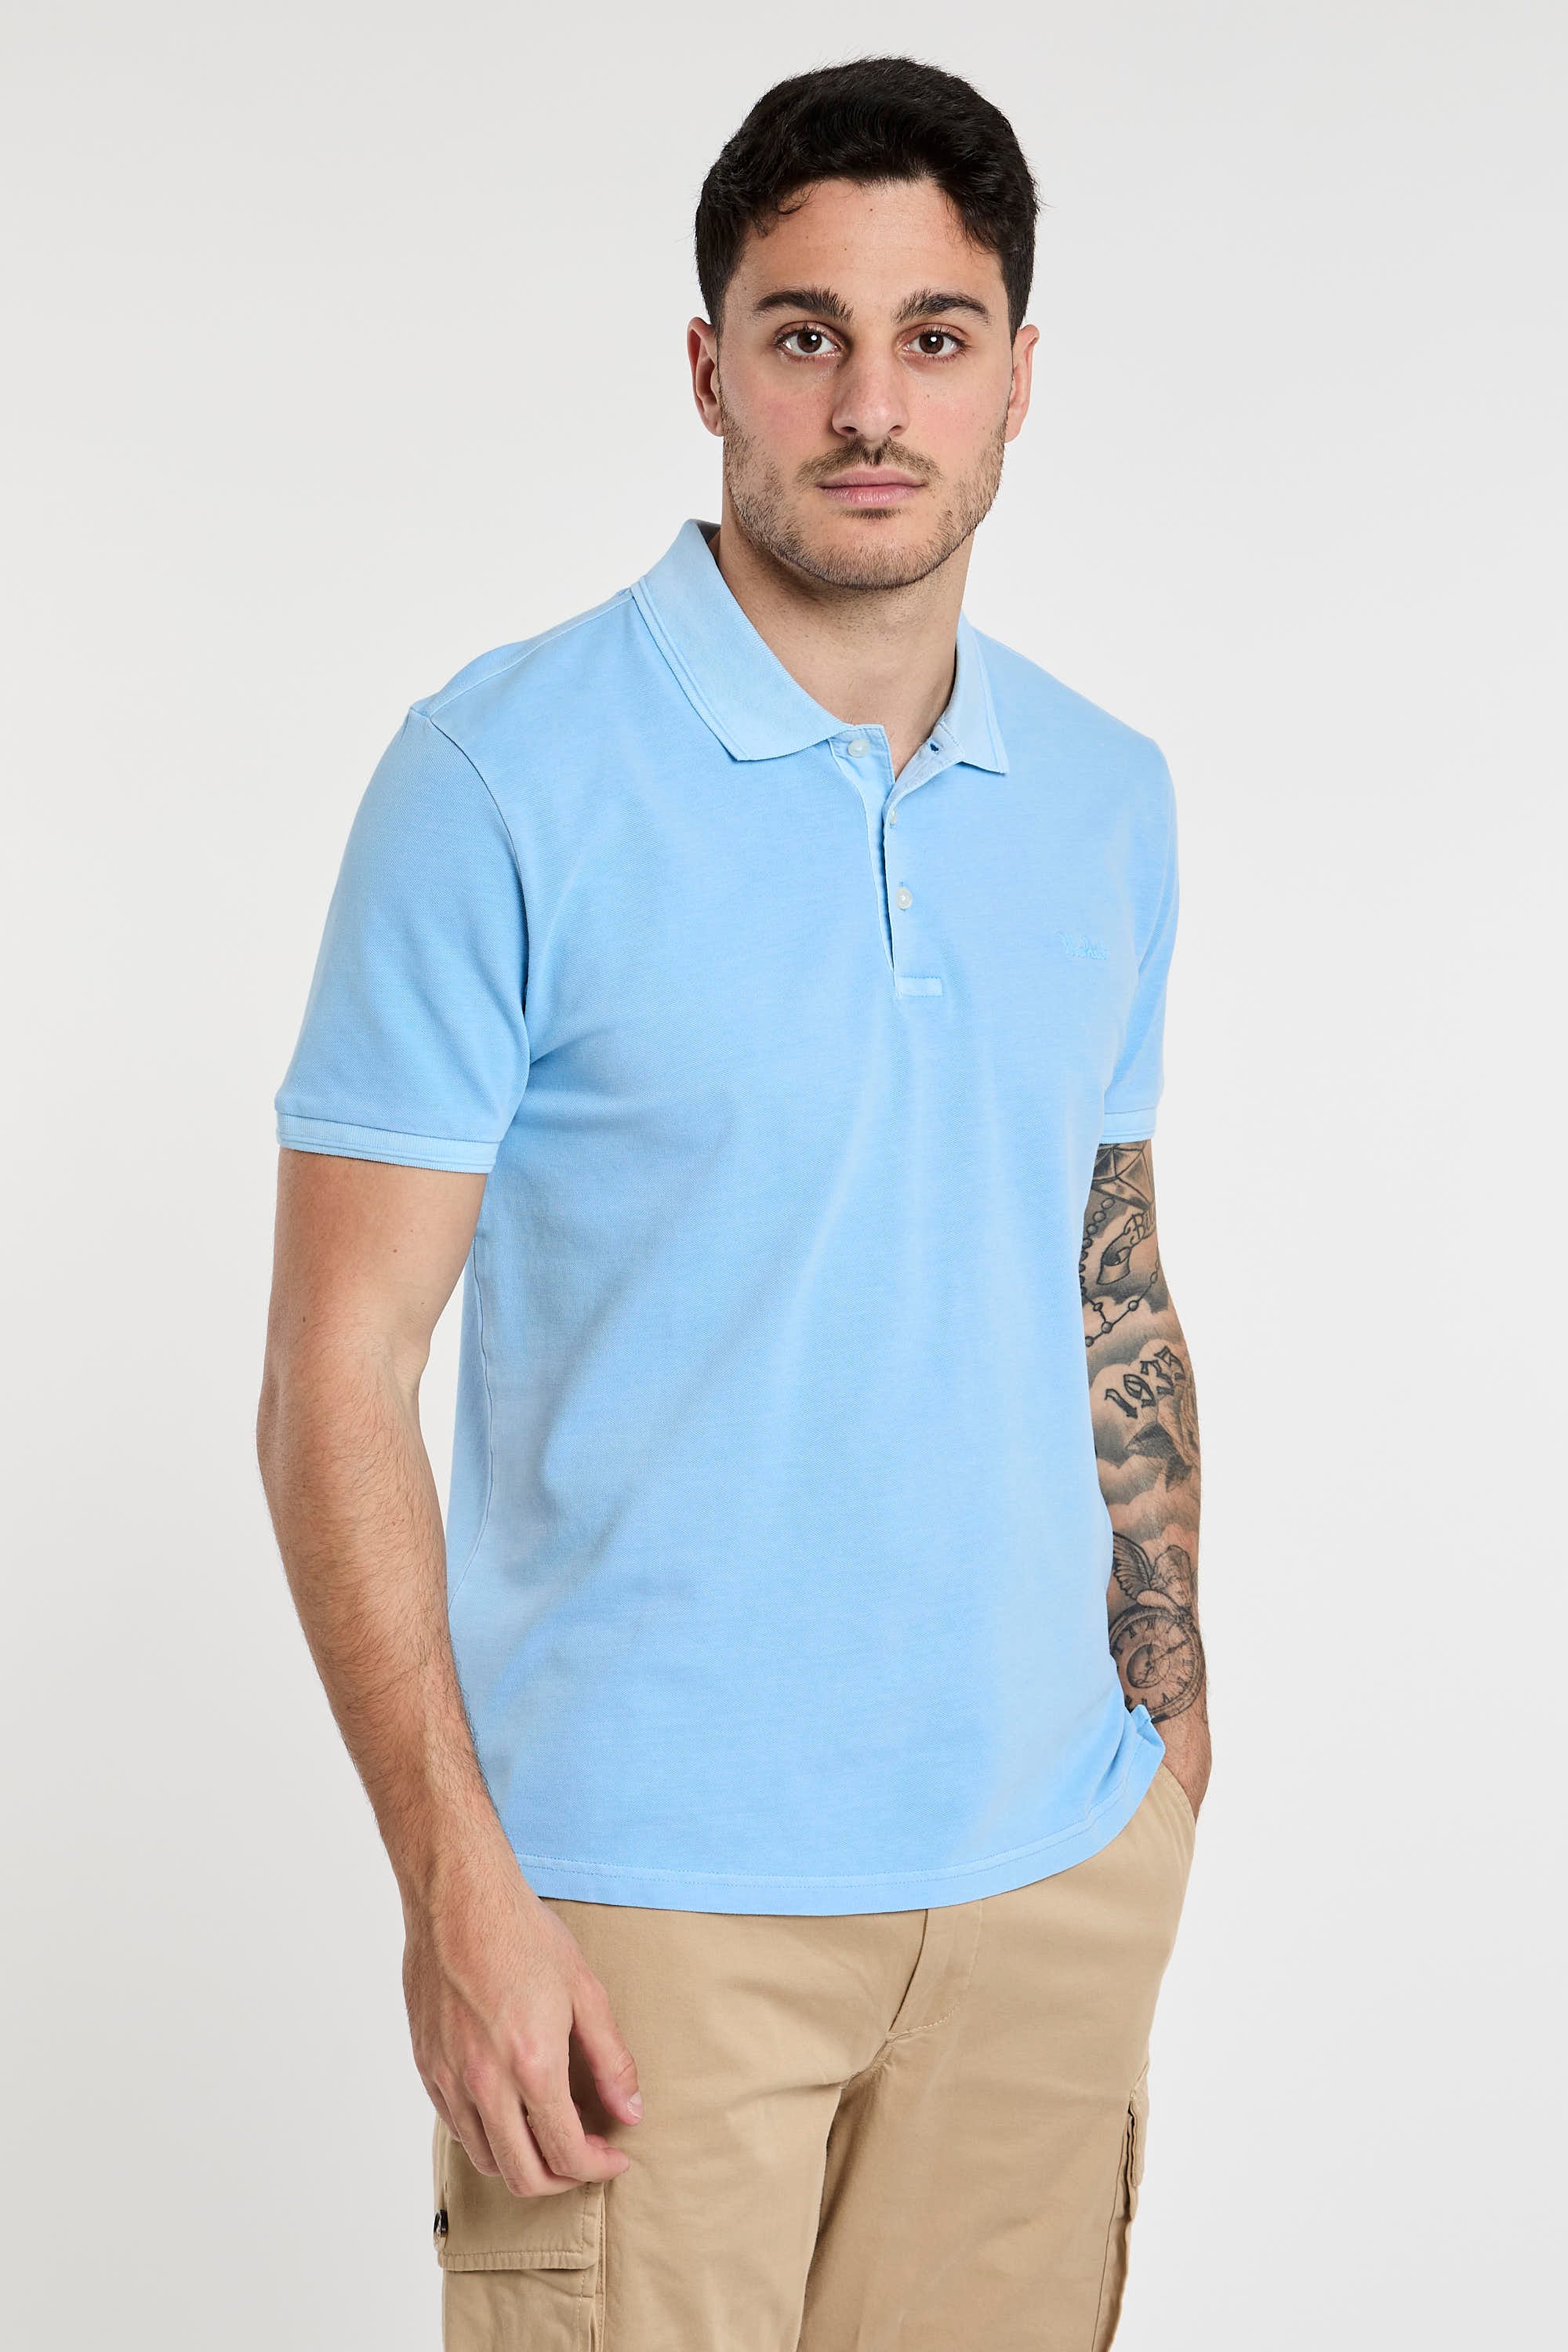 Woolrich Mackinack Piqué Stretch Cotton Polo in Light Blue-1